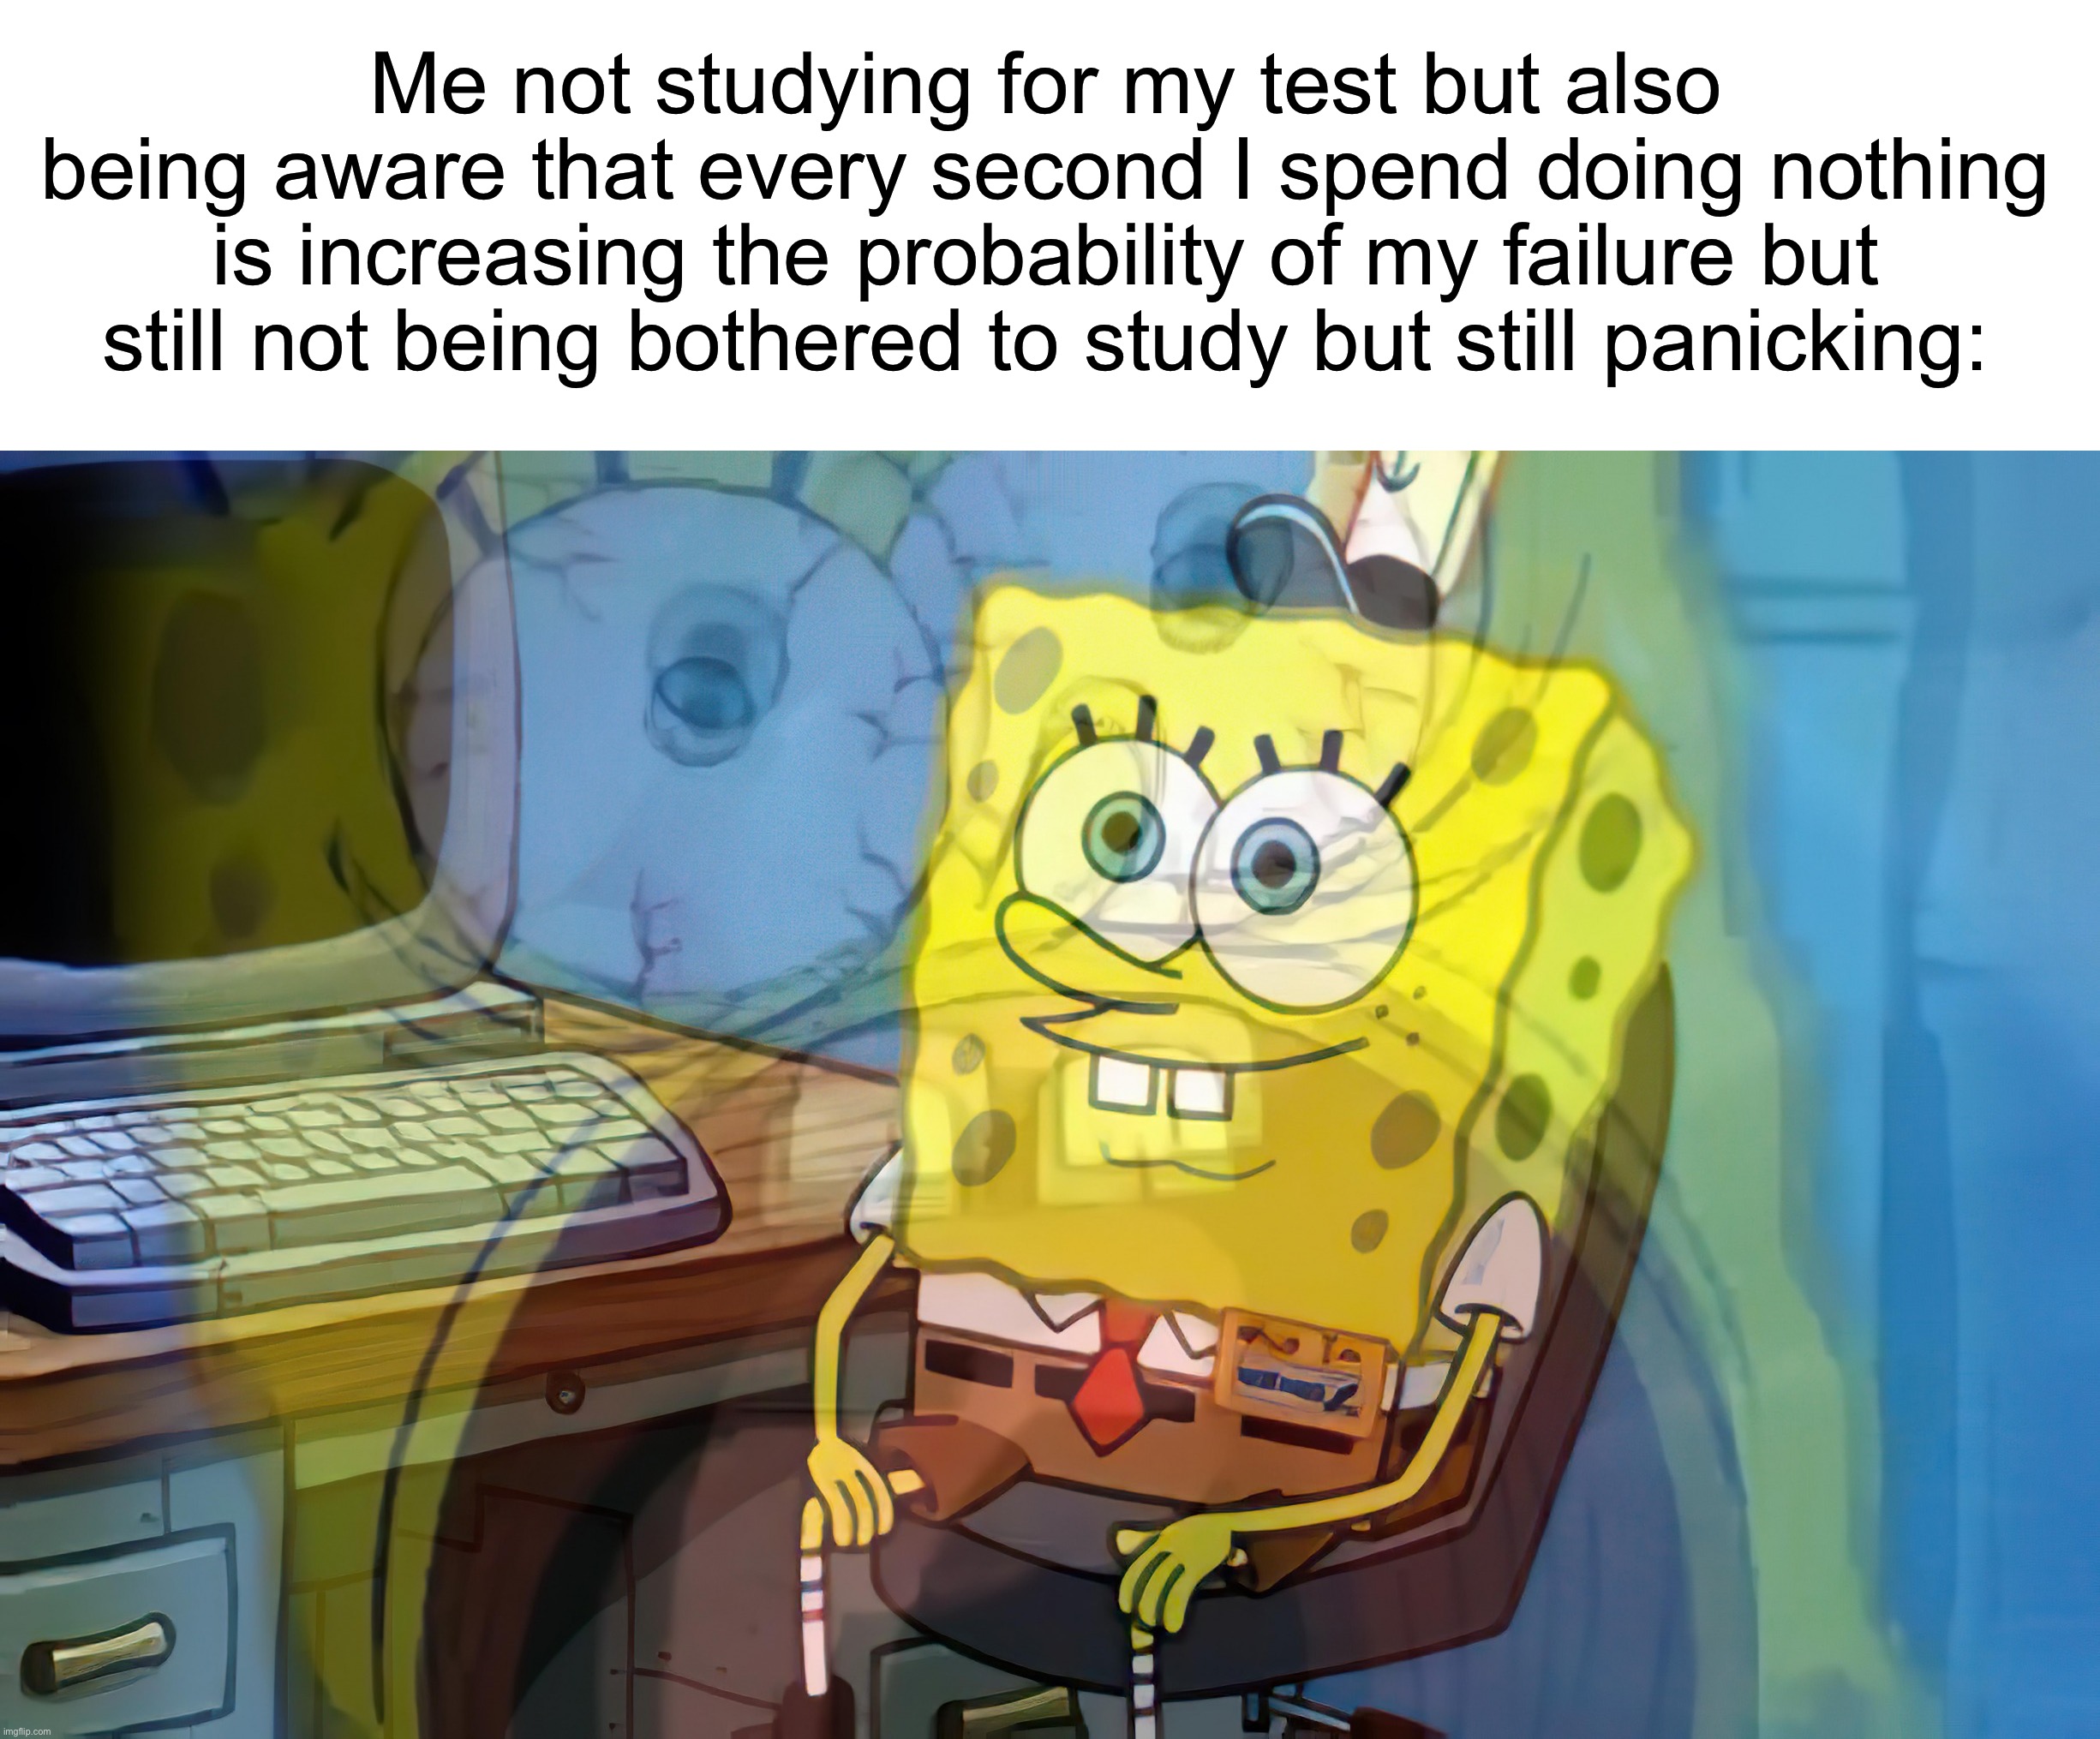 Yes, this is a confusing meme | Me not studying for my test but also being aware that every second I spend doing nothing is increasing the probability of my failure but still not being bothered to study but still panicking: | image tagged in spongebob internal screaming,memes,funny,true story,relatable memes,school | made w/ Imgflip meme maker